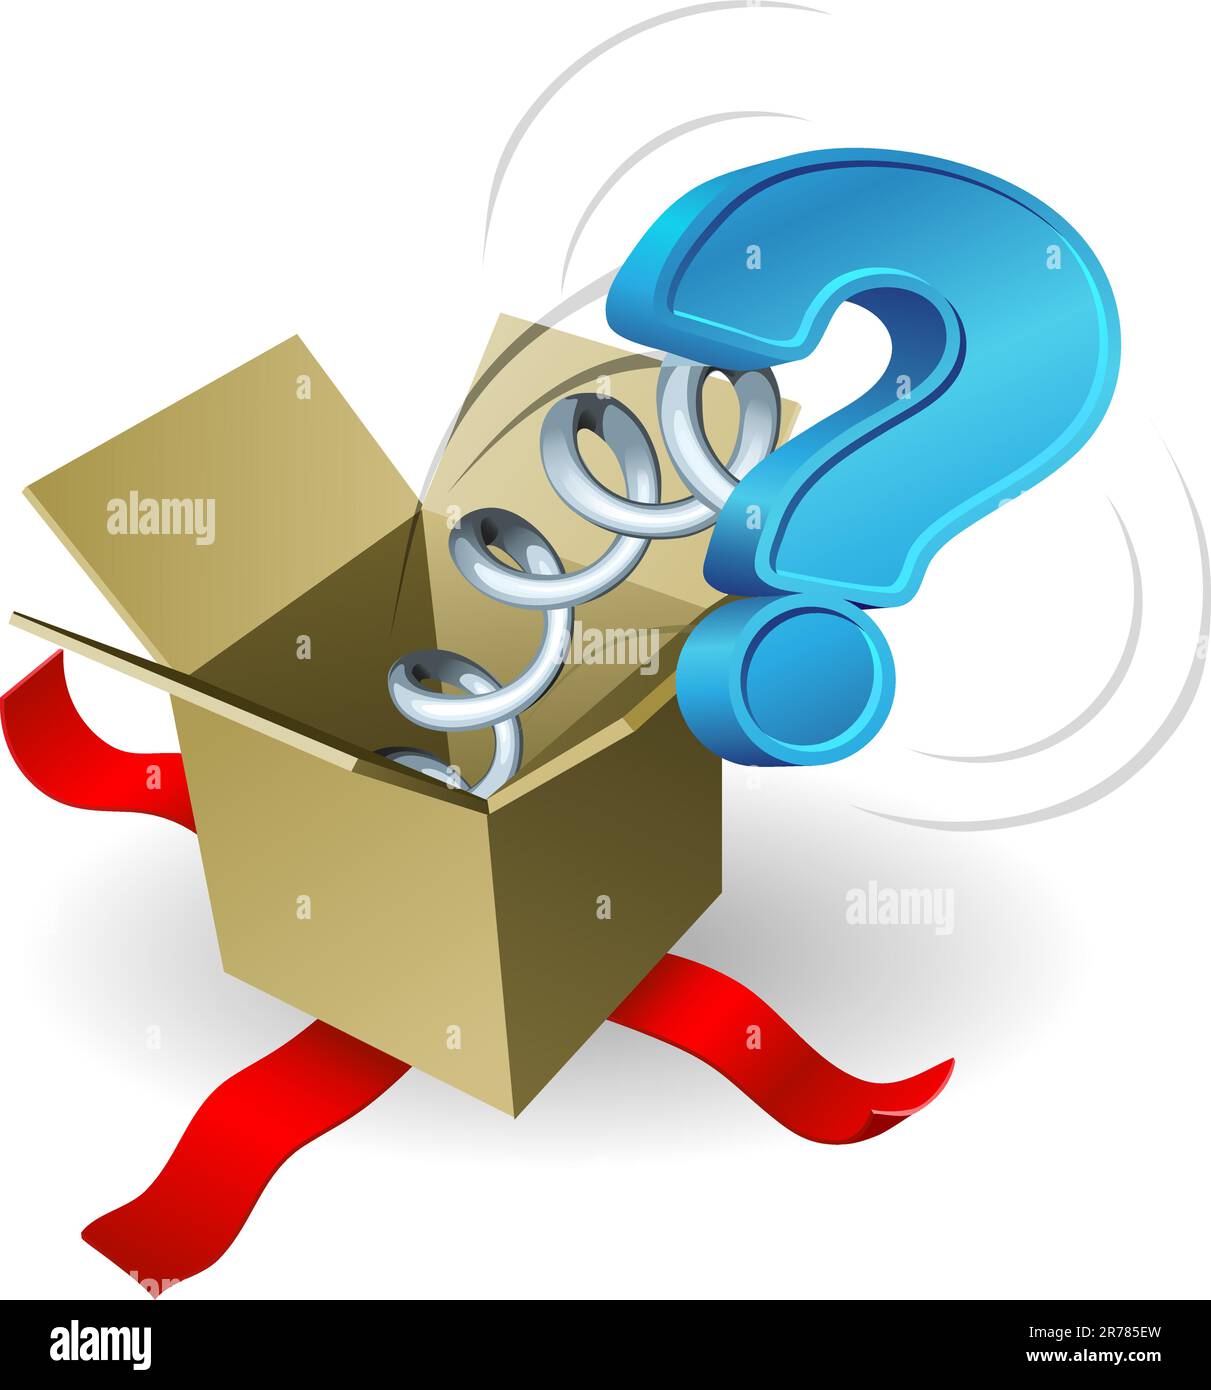 A question mark springing out of a box conceptual illustration. Stock Vector